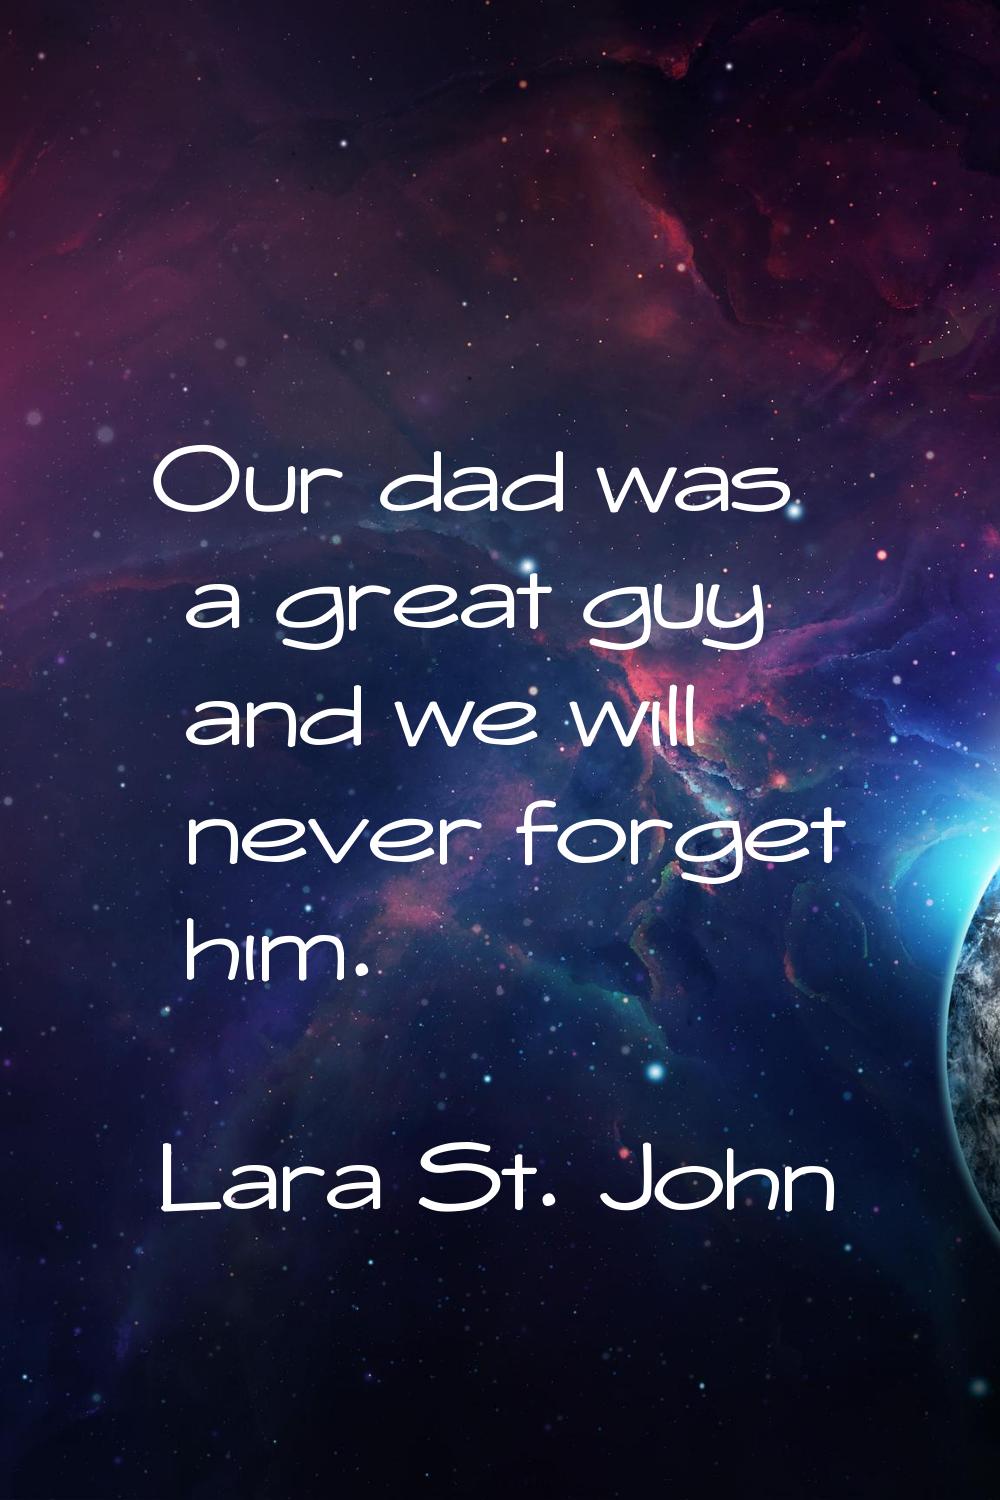 Our dad was a great guy and we will never forget him.